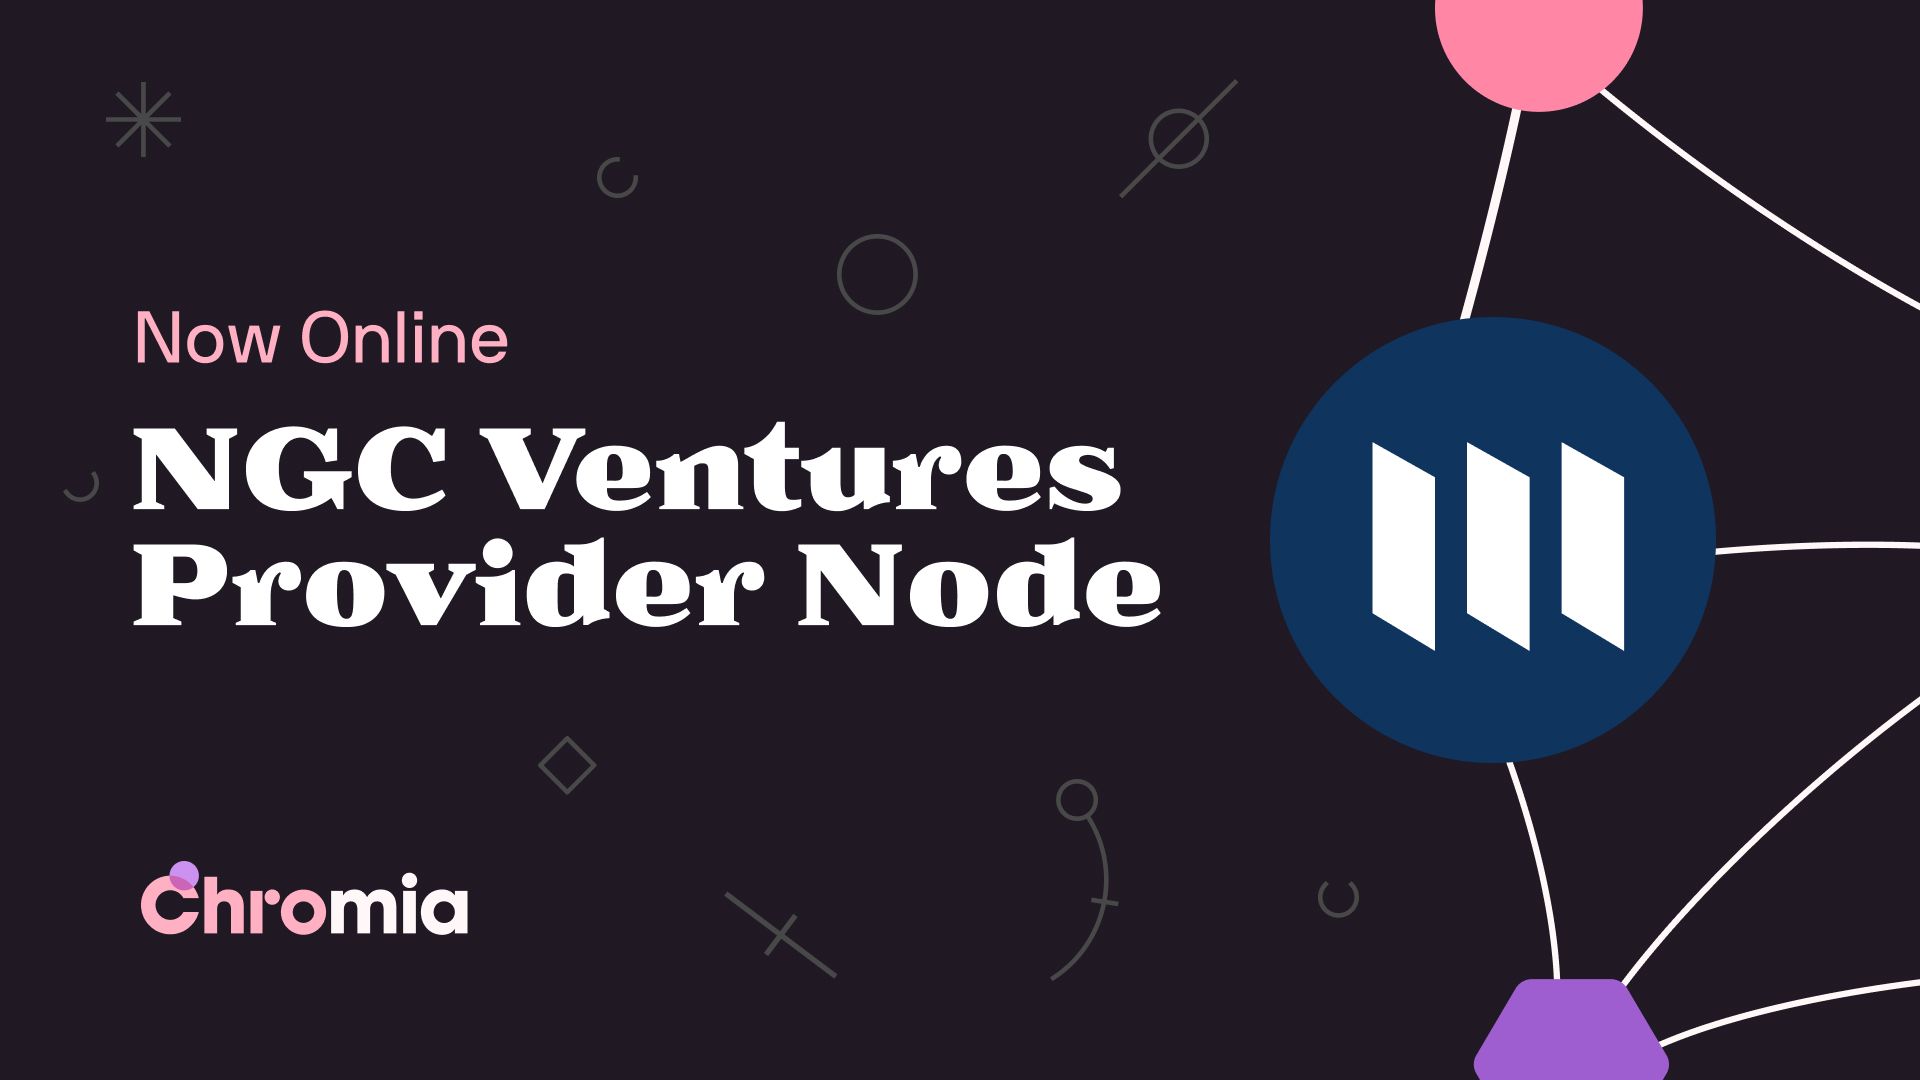 NGC Ventures System Provider Node is Now Online